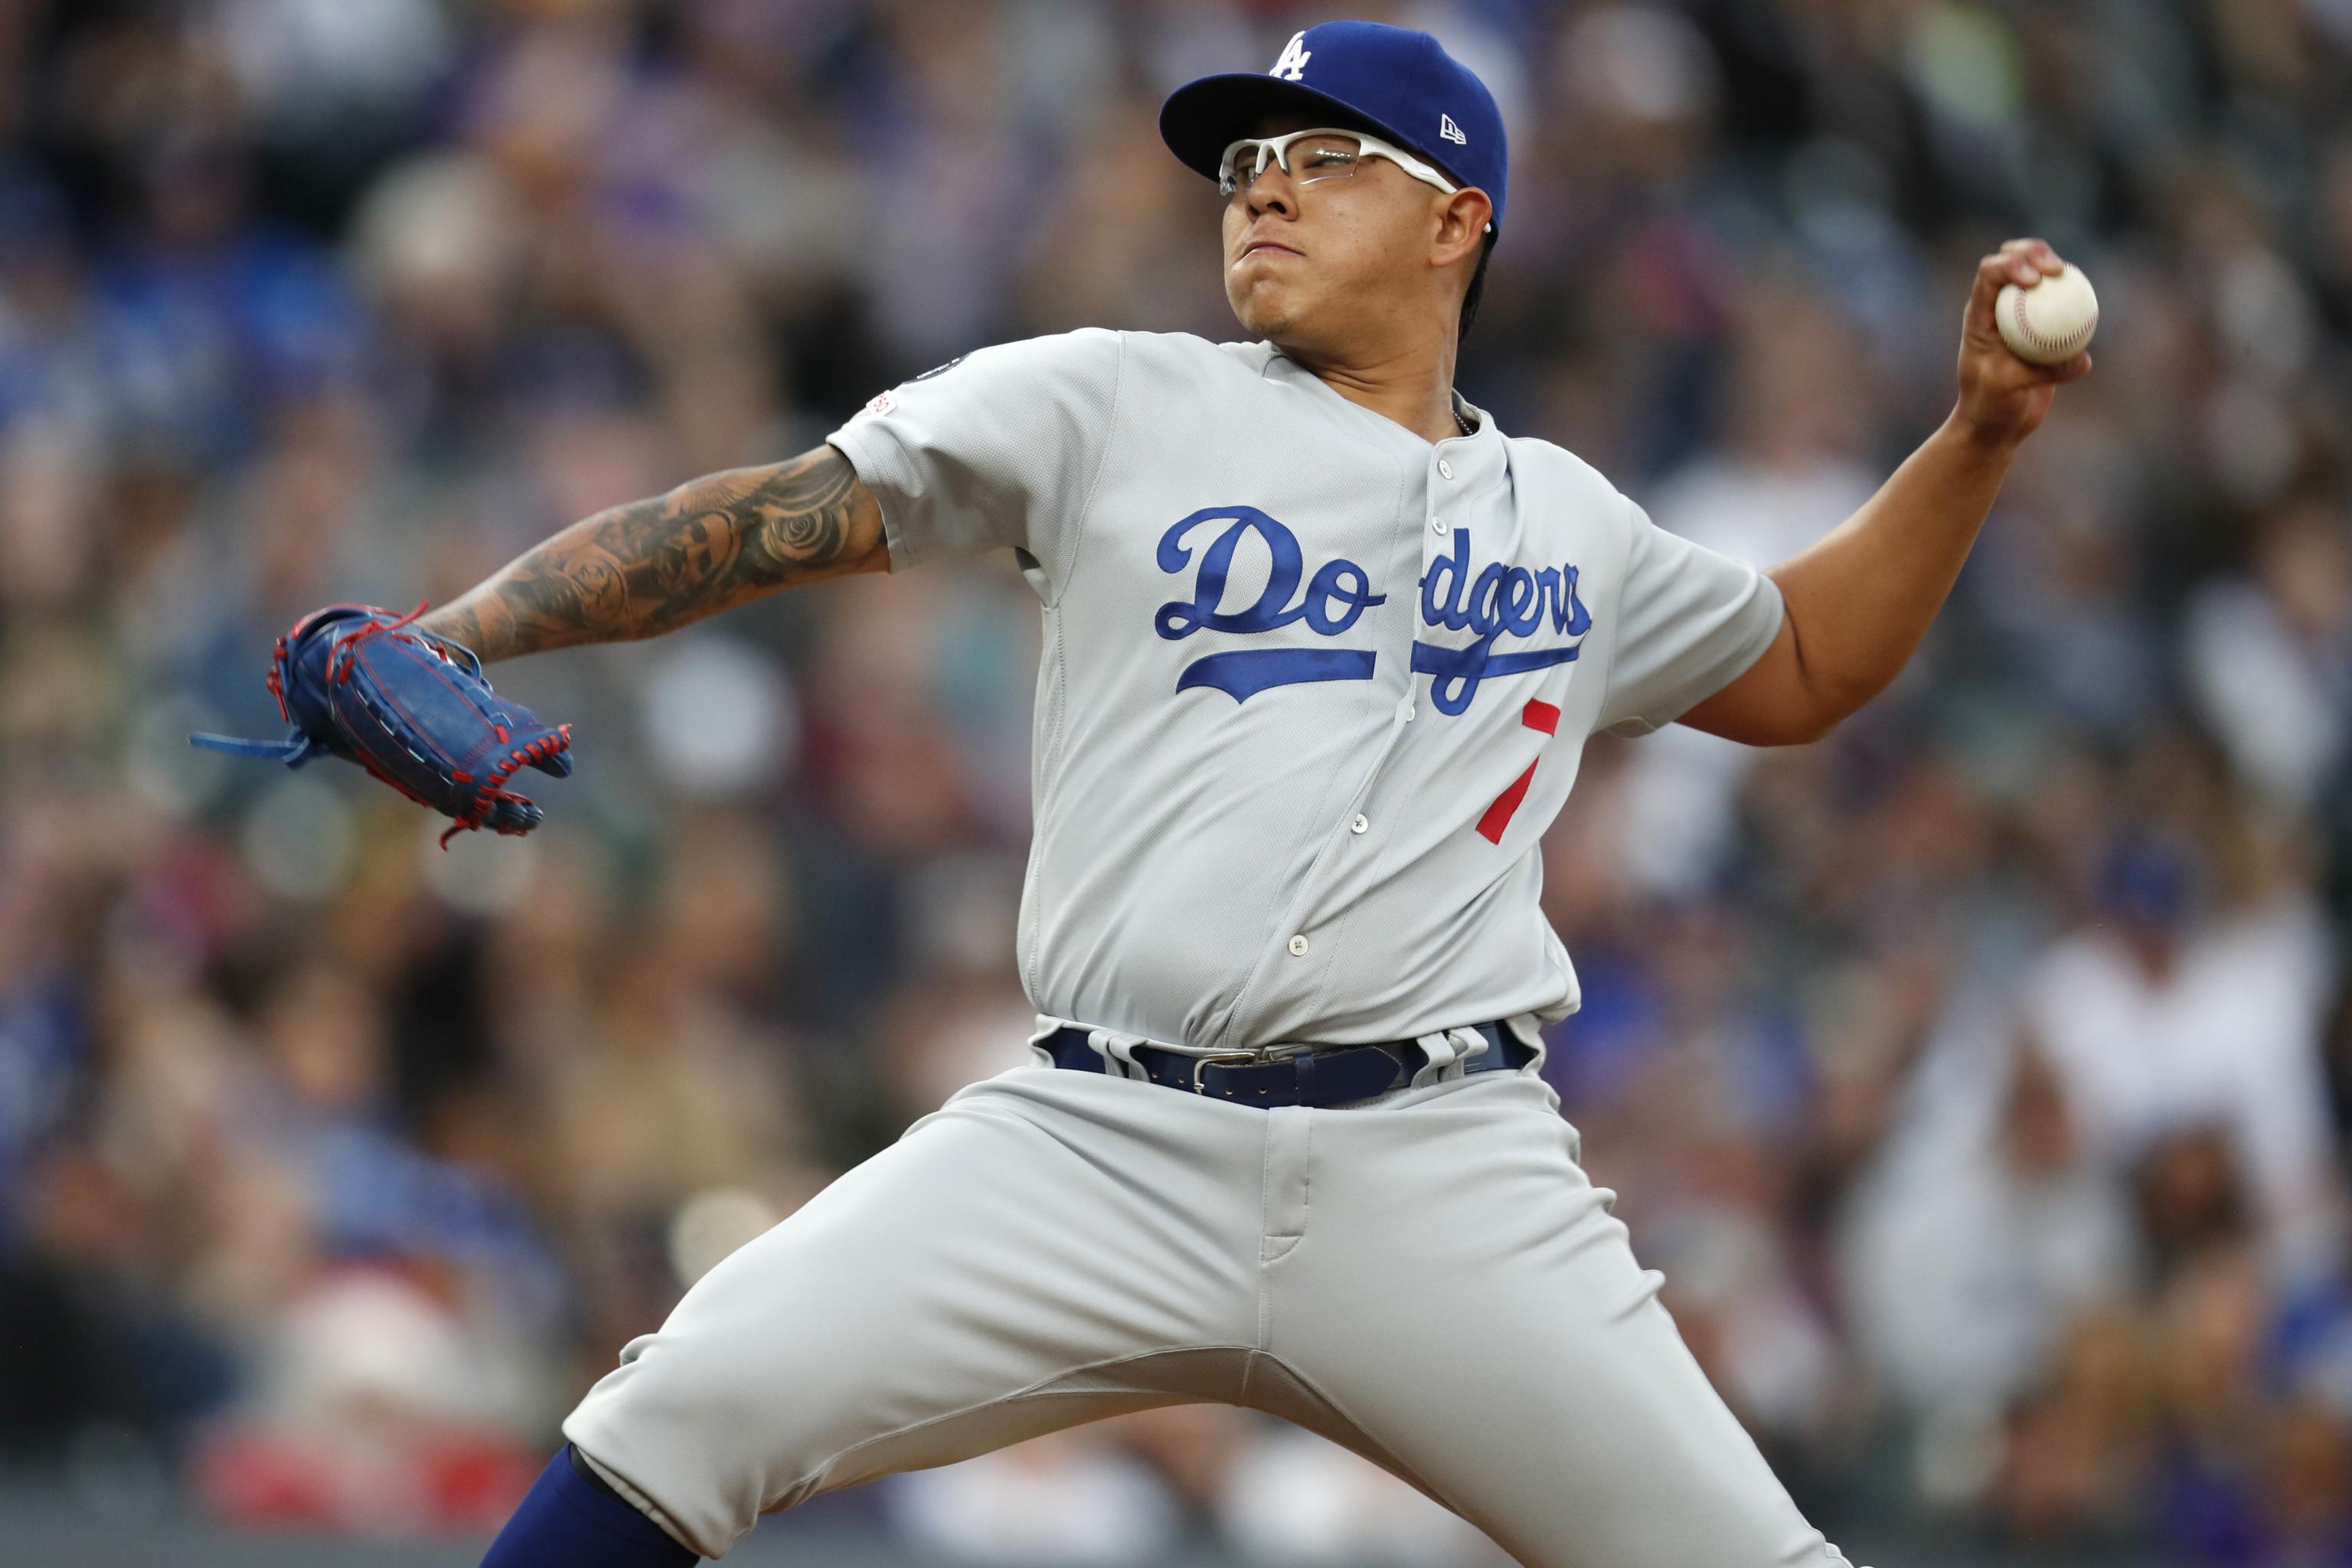 Julio Urias arrested for domestic violence: Insights into his